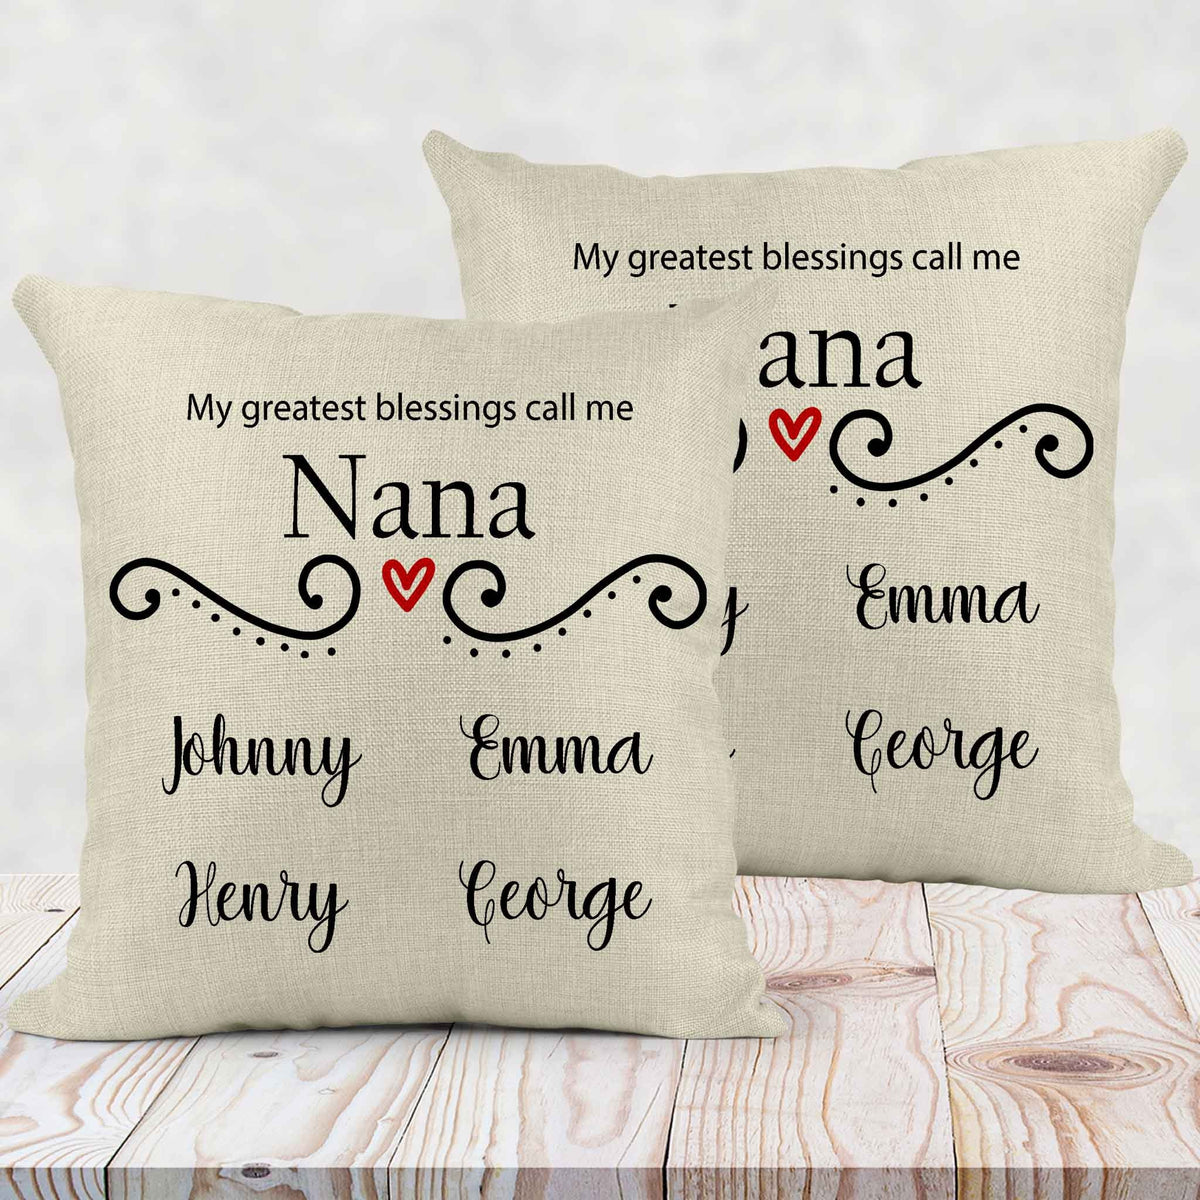 Personalized Throw Pillow | Custom Decorative Pillow | Nana&#39;s Greatest Blessing